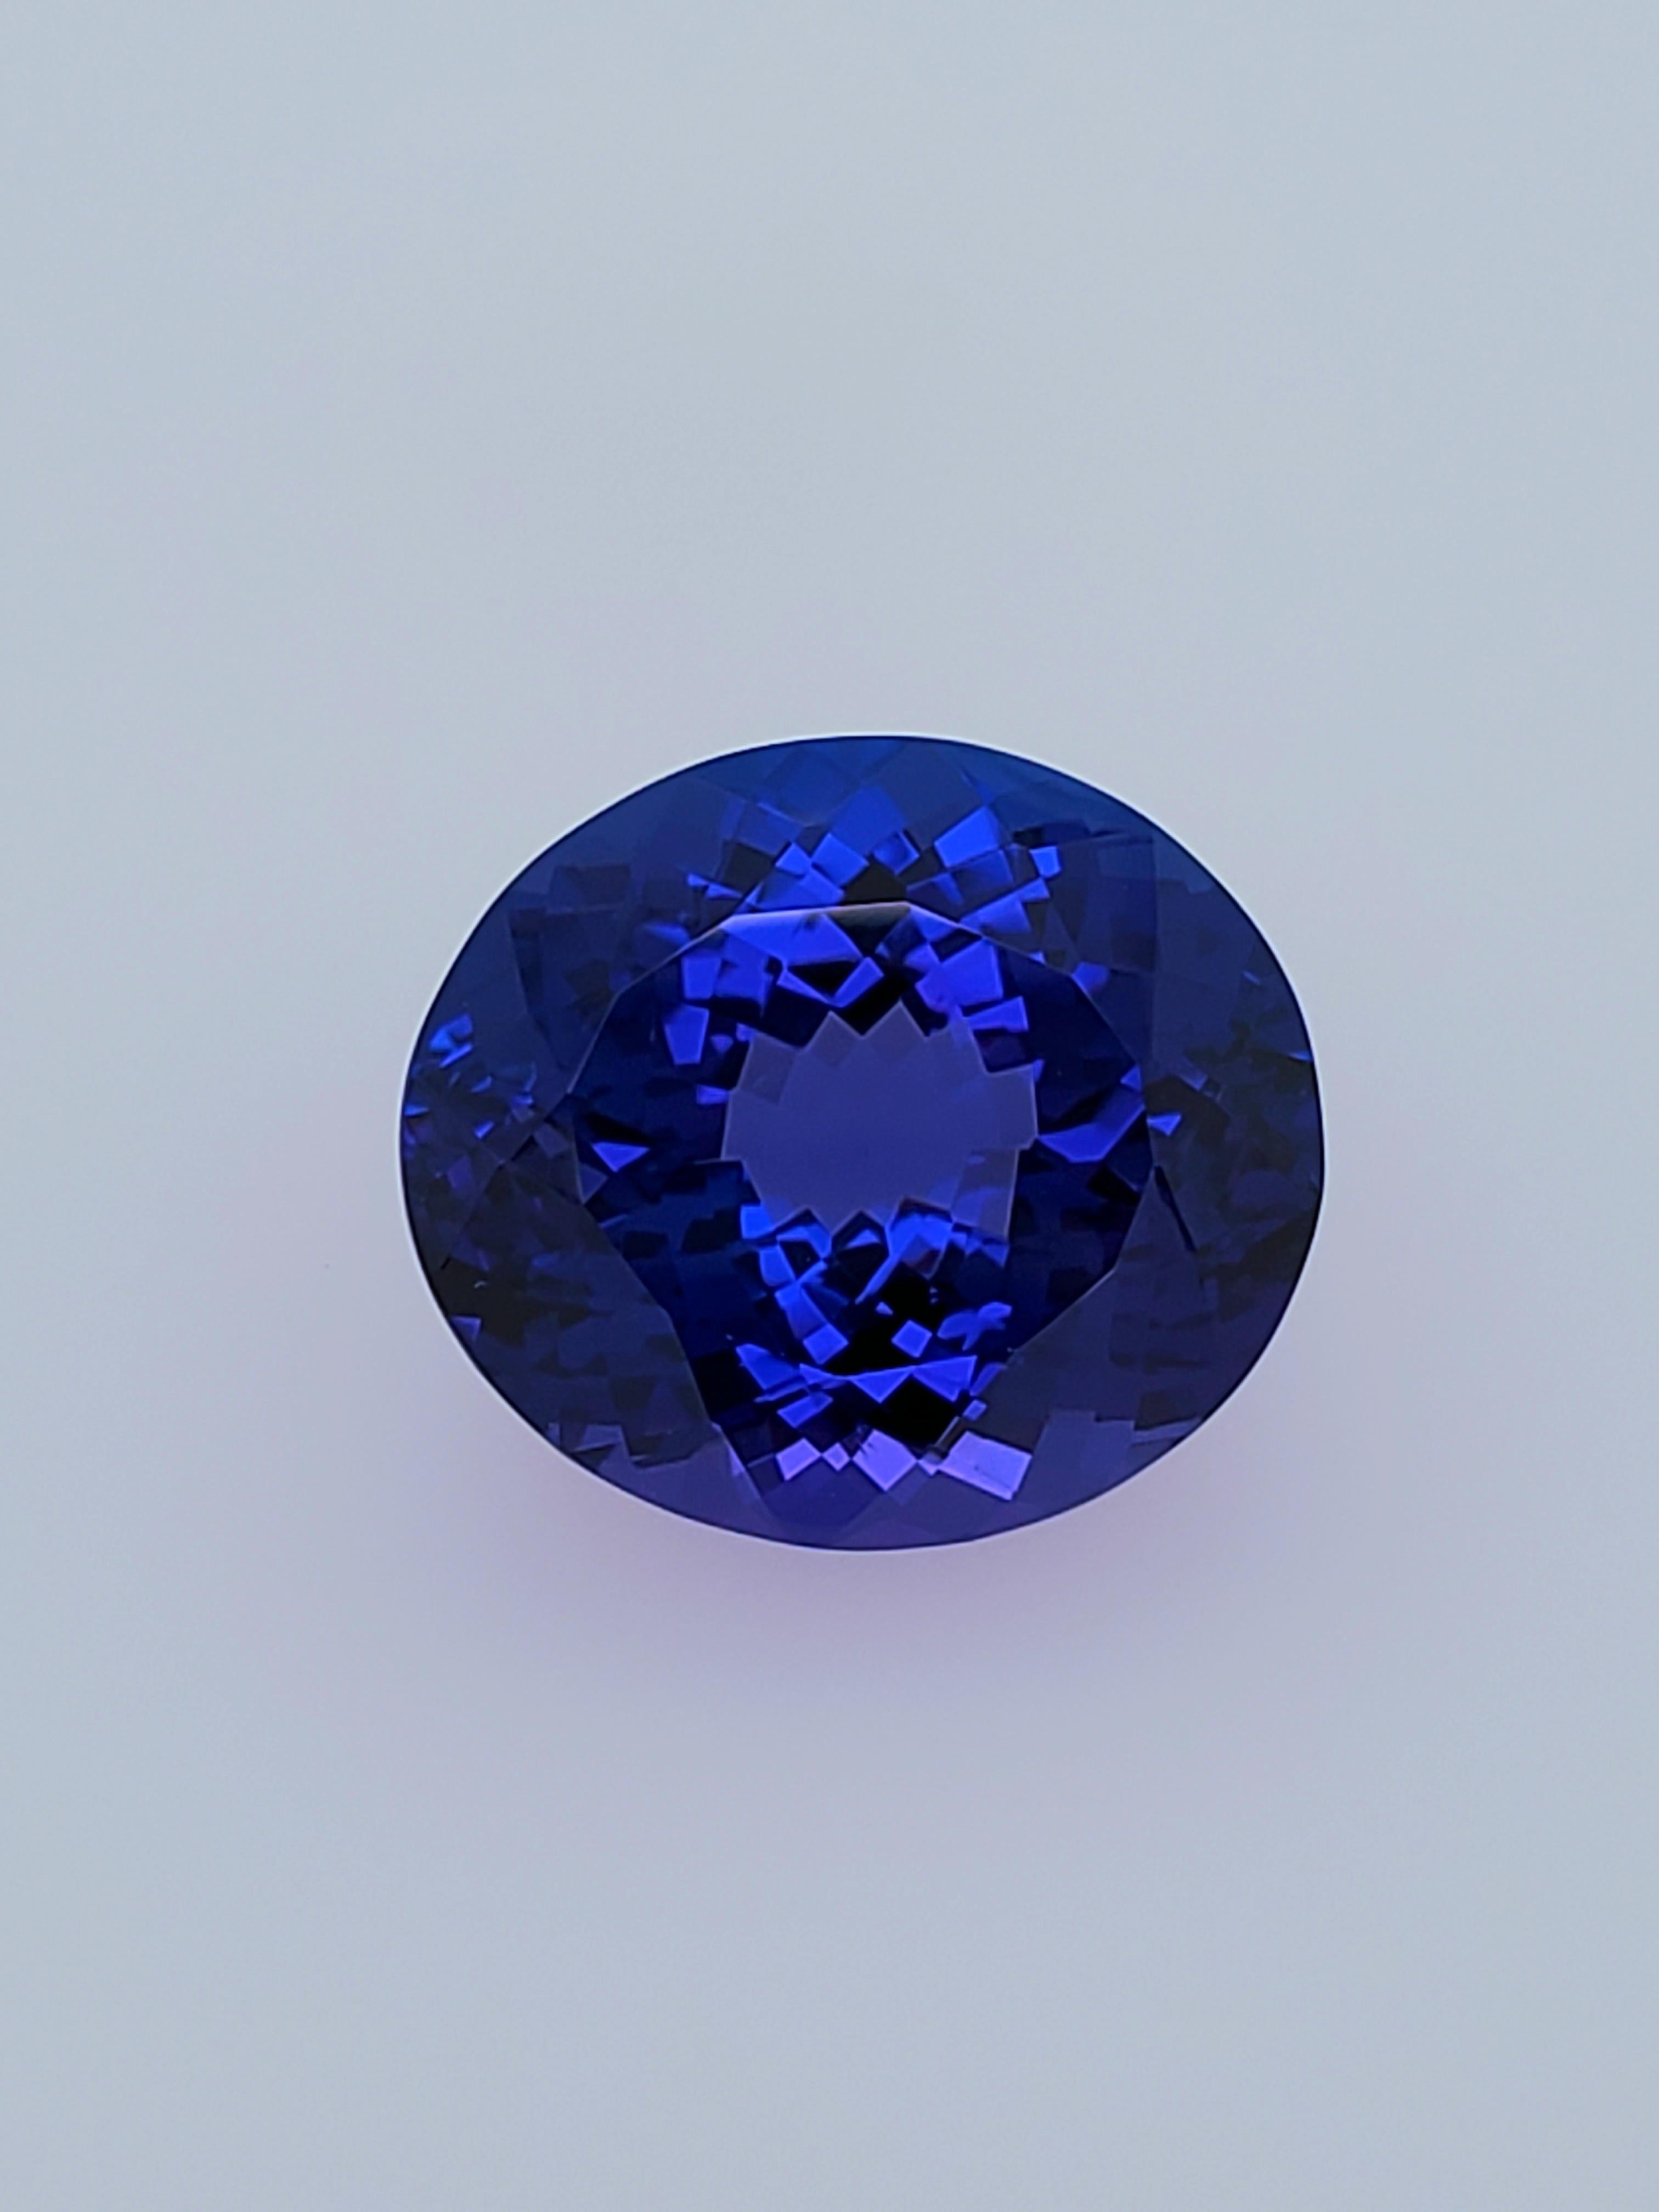 This large Tanzanite has rarely seen the light of day since it's purchase back in about 1990. It has a certificate from Guild Laboratories in Los Angeles, CA, along with a photograph and with a retail price of $27,000 - that was back in 1991!